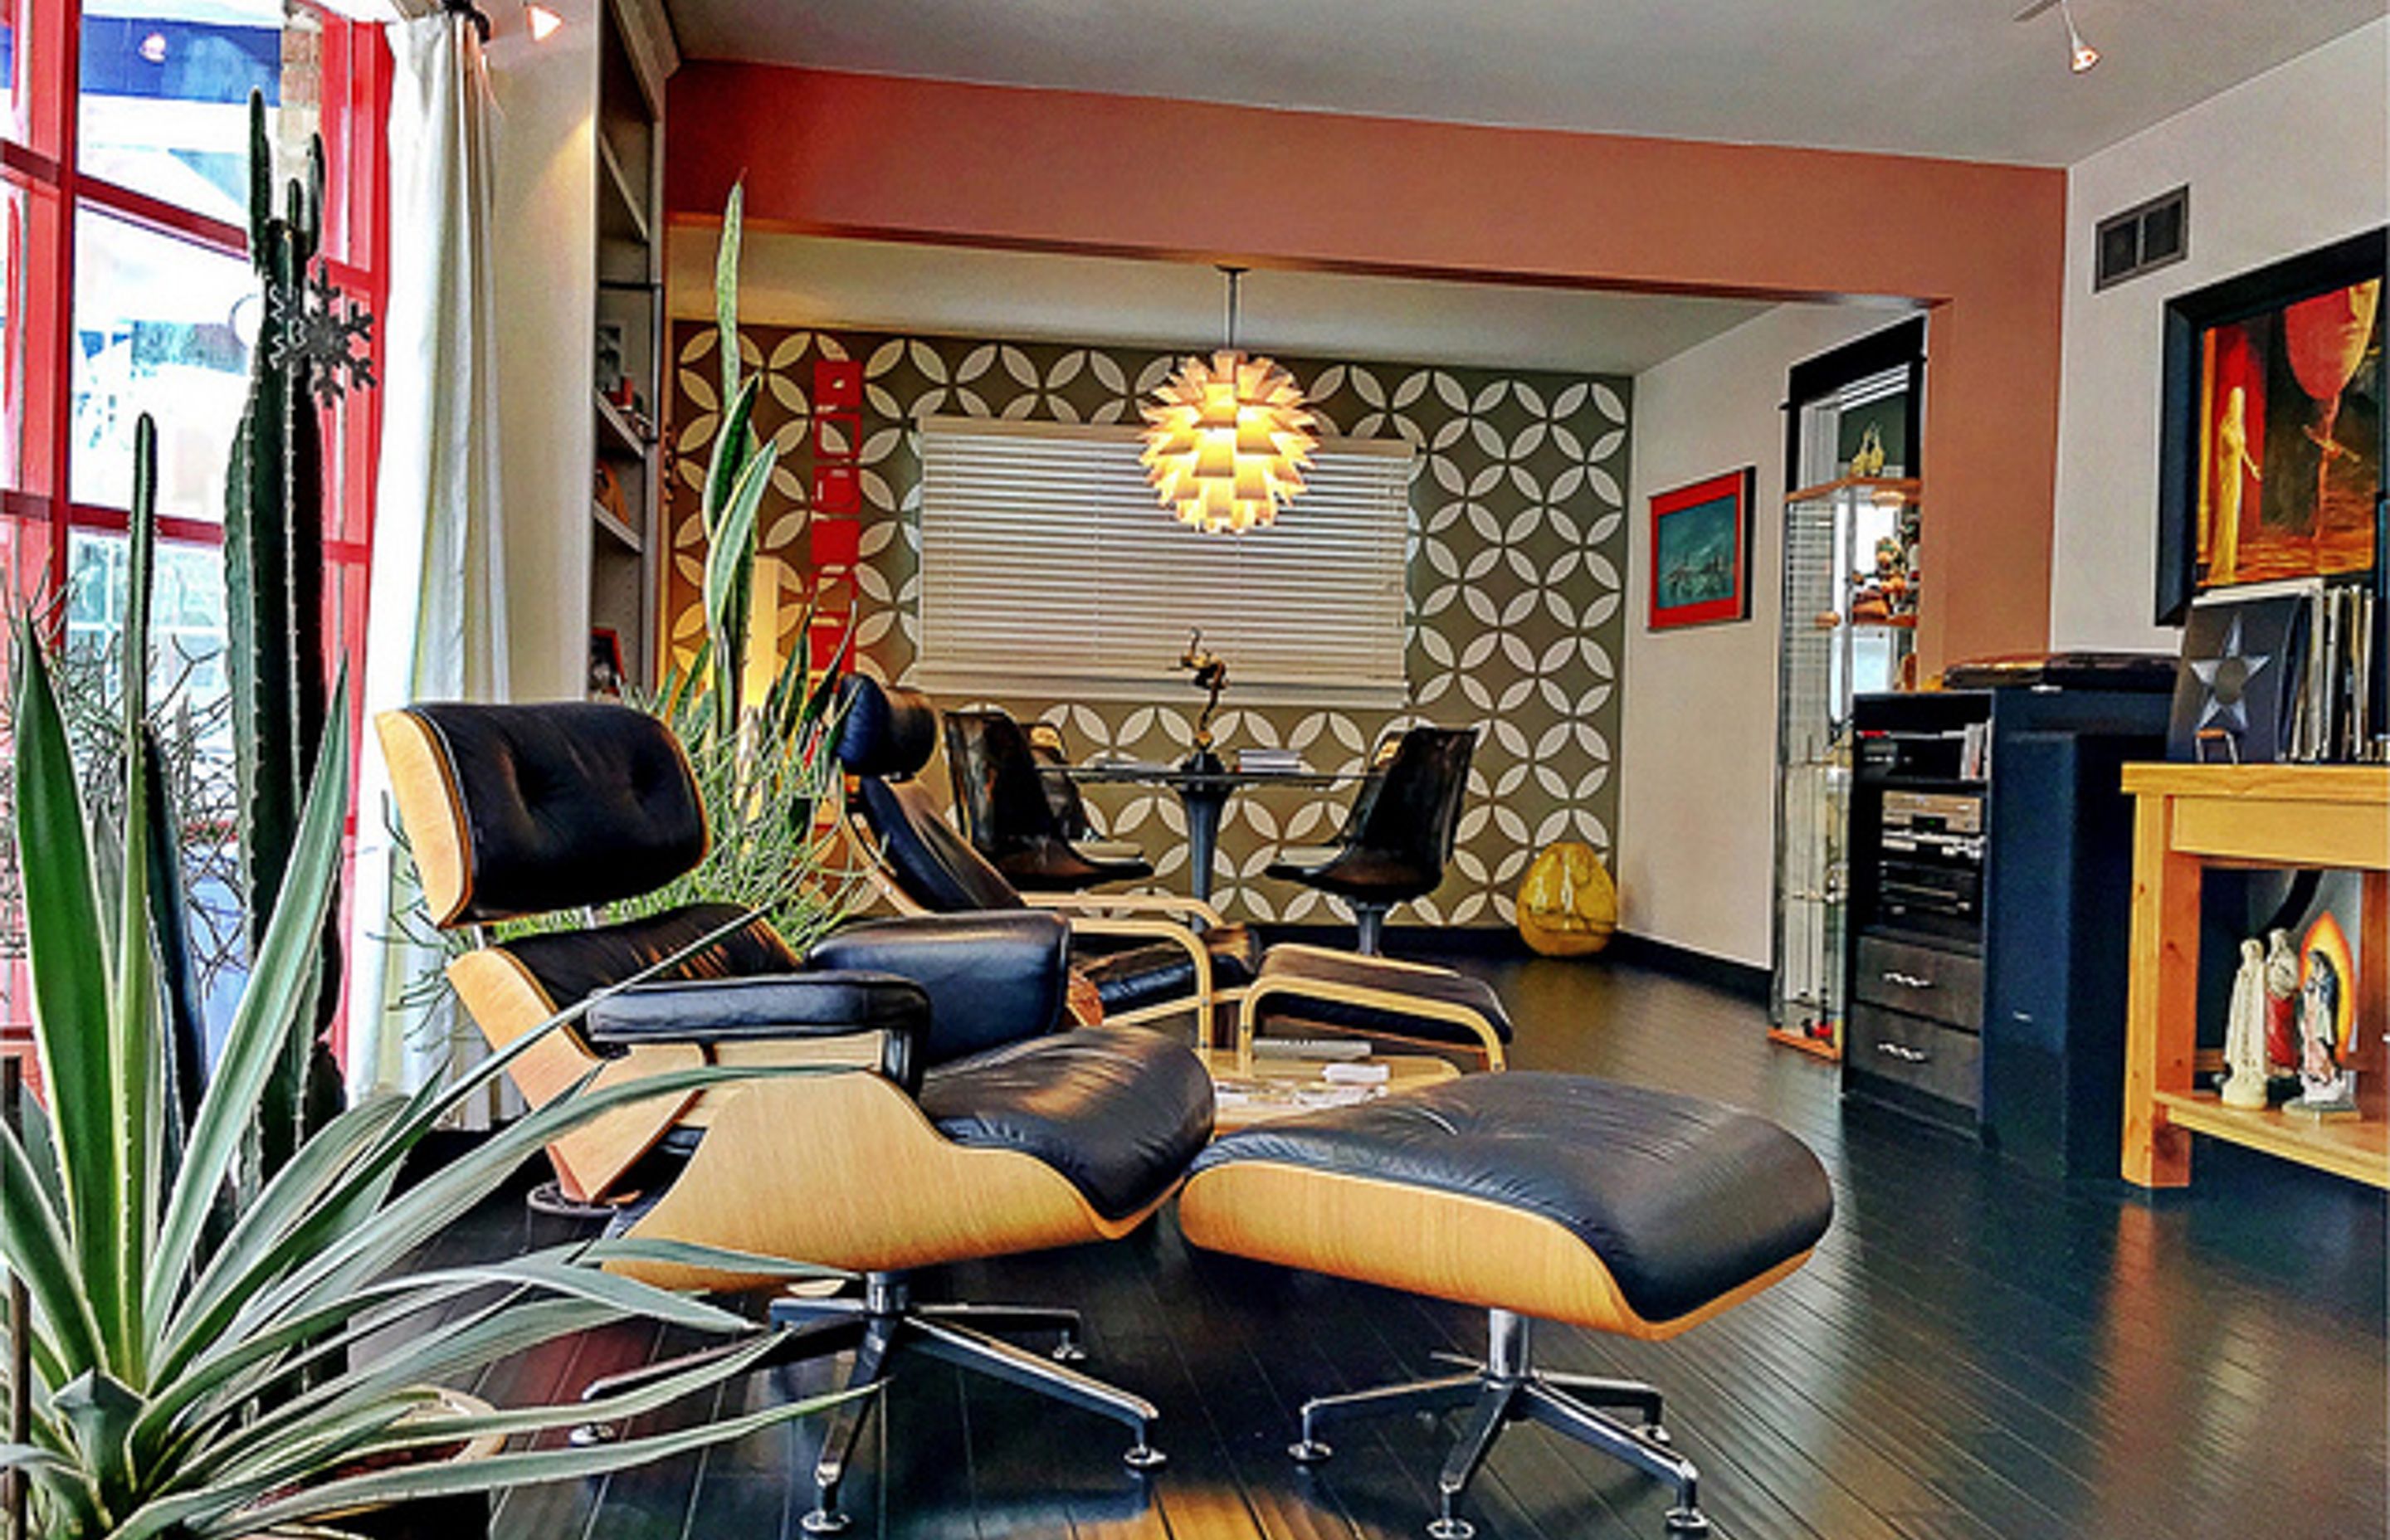 Bold prints, pops of colour and the iconic Eames chair give this space its mid-century mode